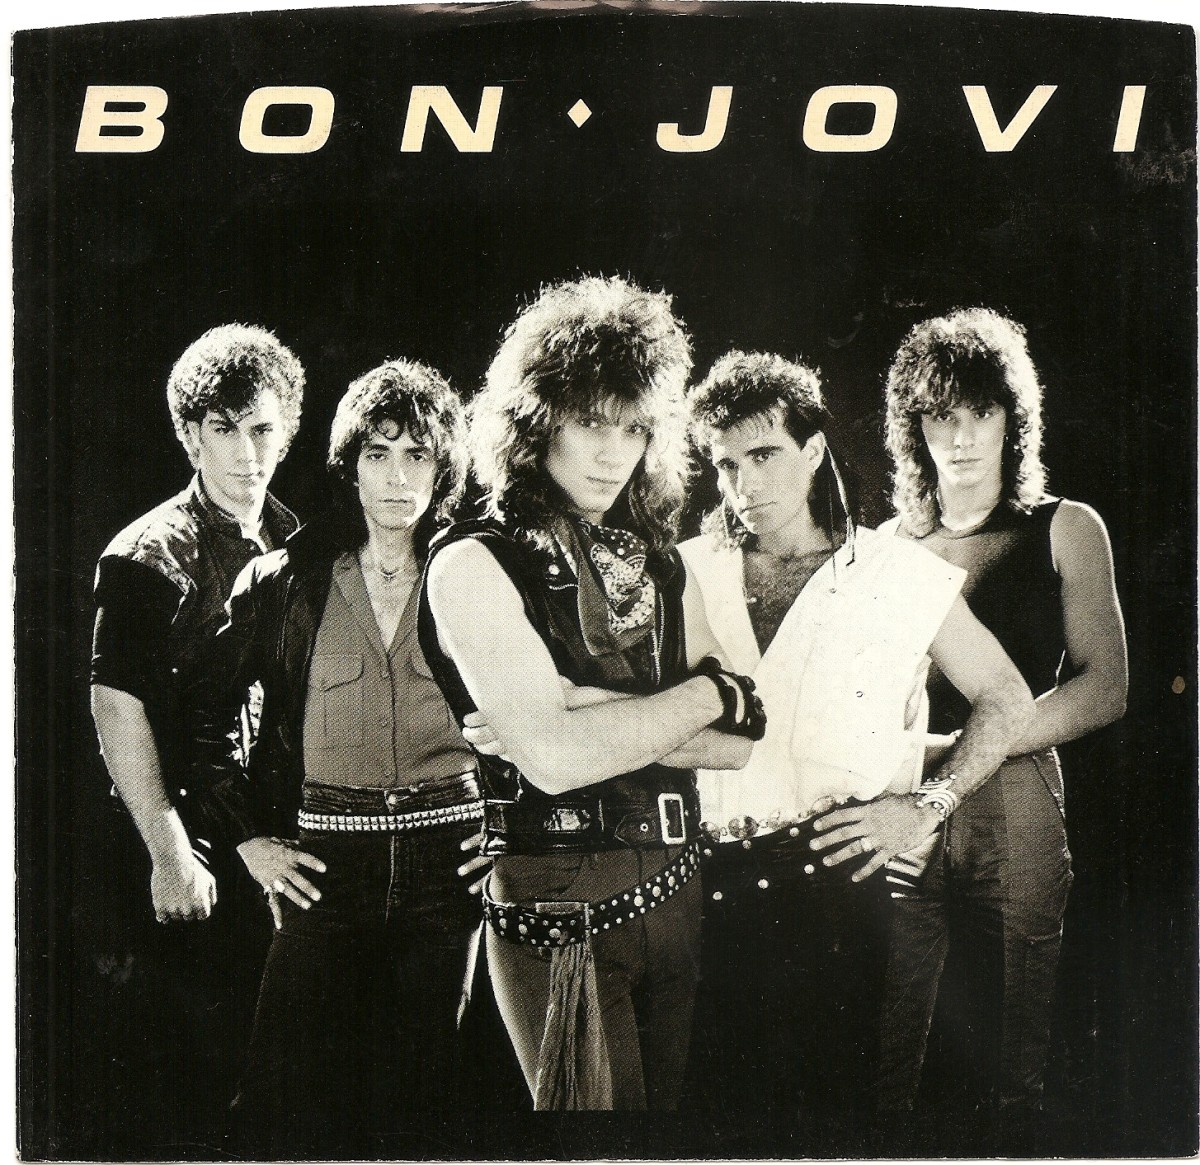 Bon Jovi was one of the most popular glam metal hair bands of the '80s.